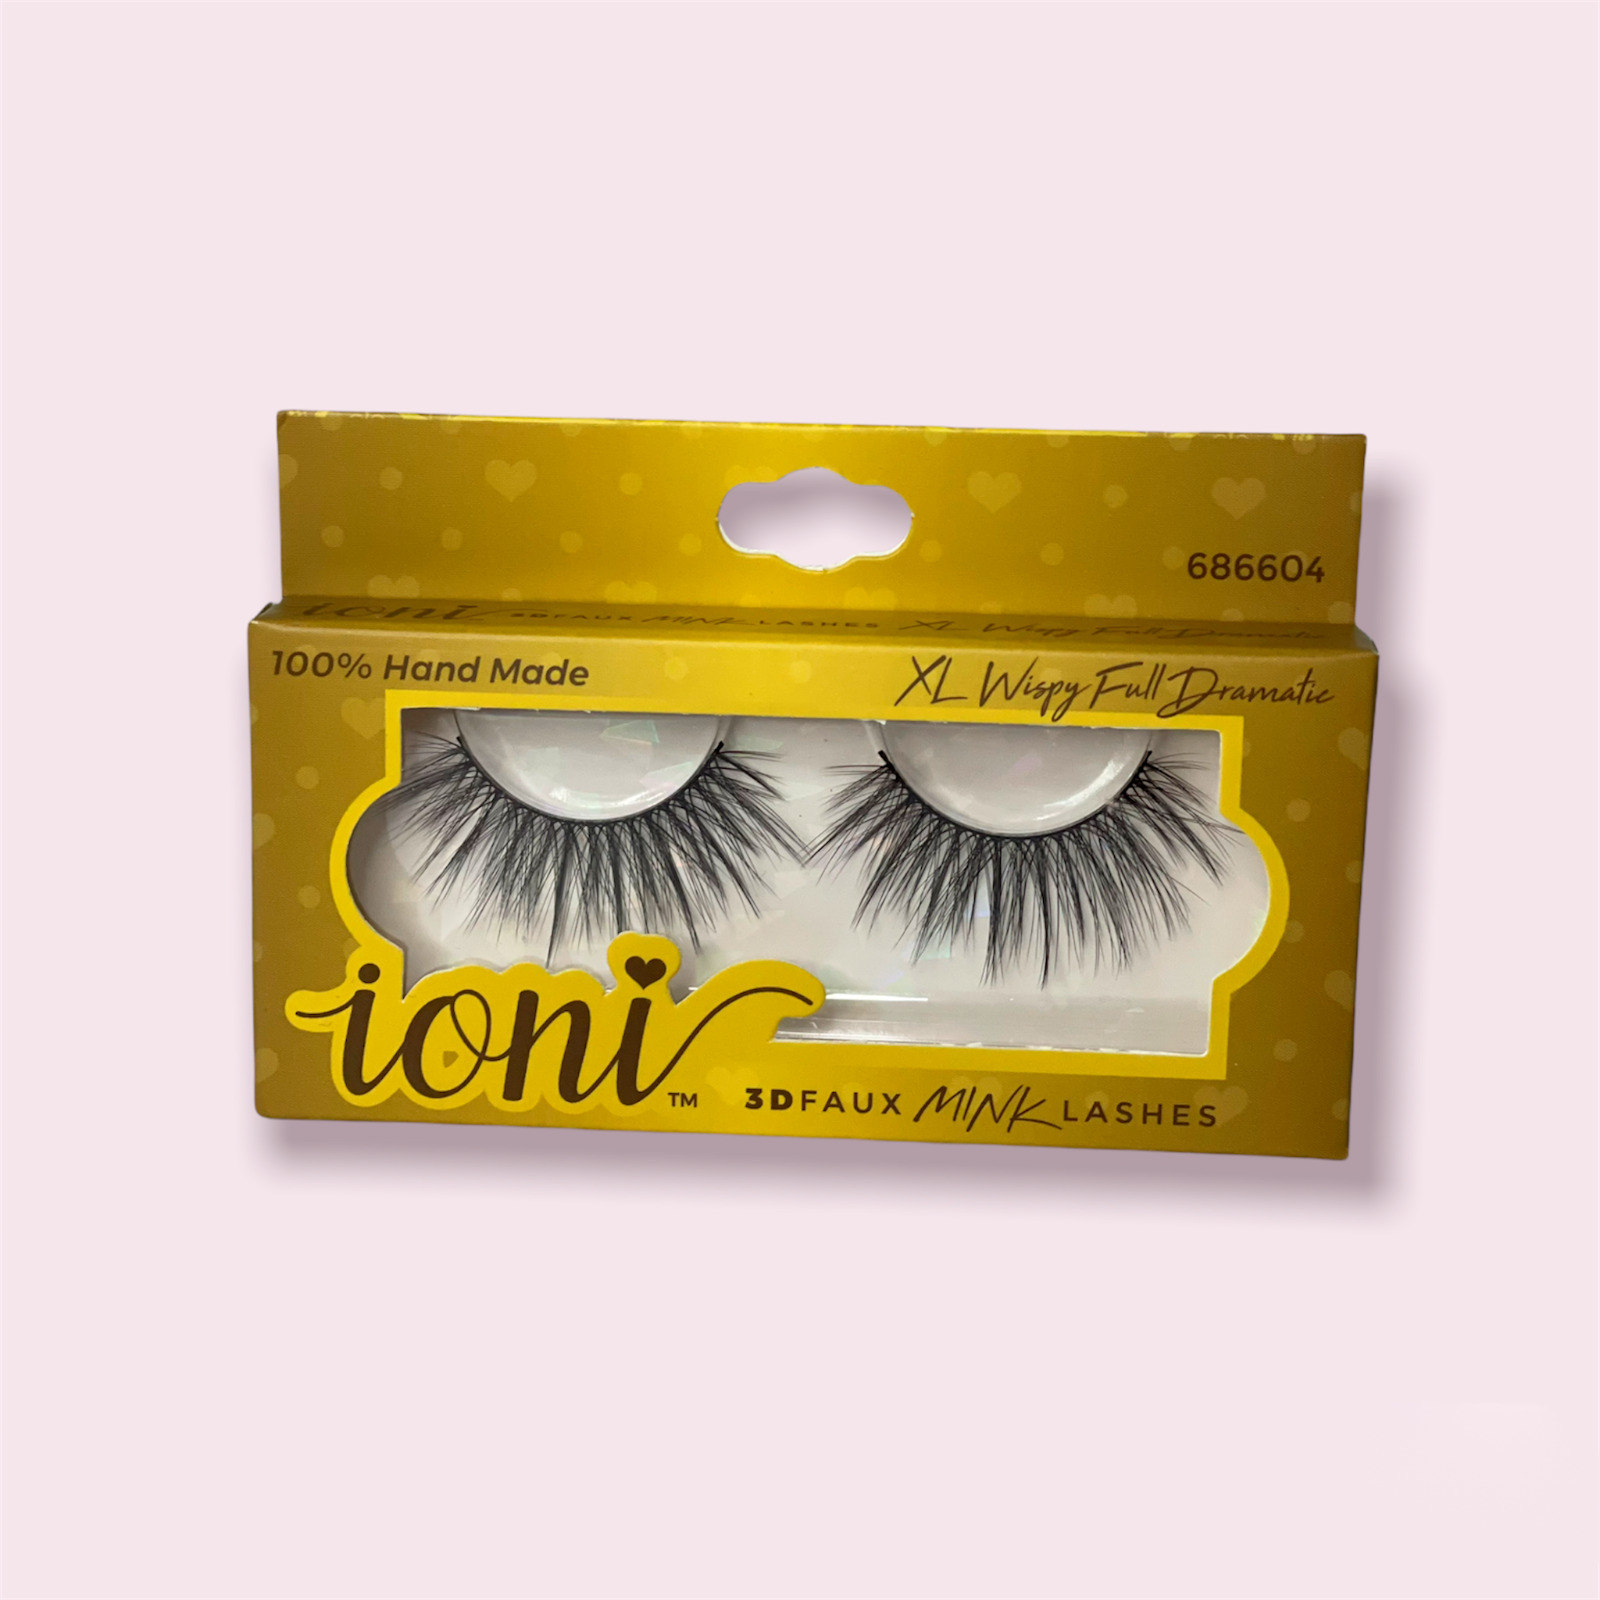 ioni 3D faux mink lashes - XL Wispy Full Dramatic - 100% Hand Made 686604